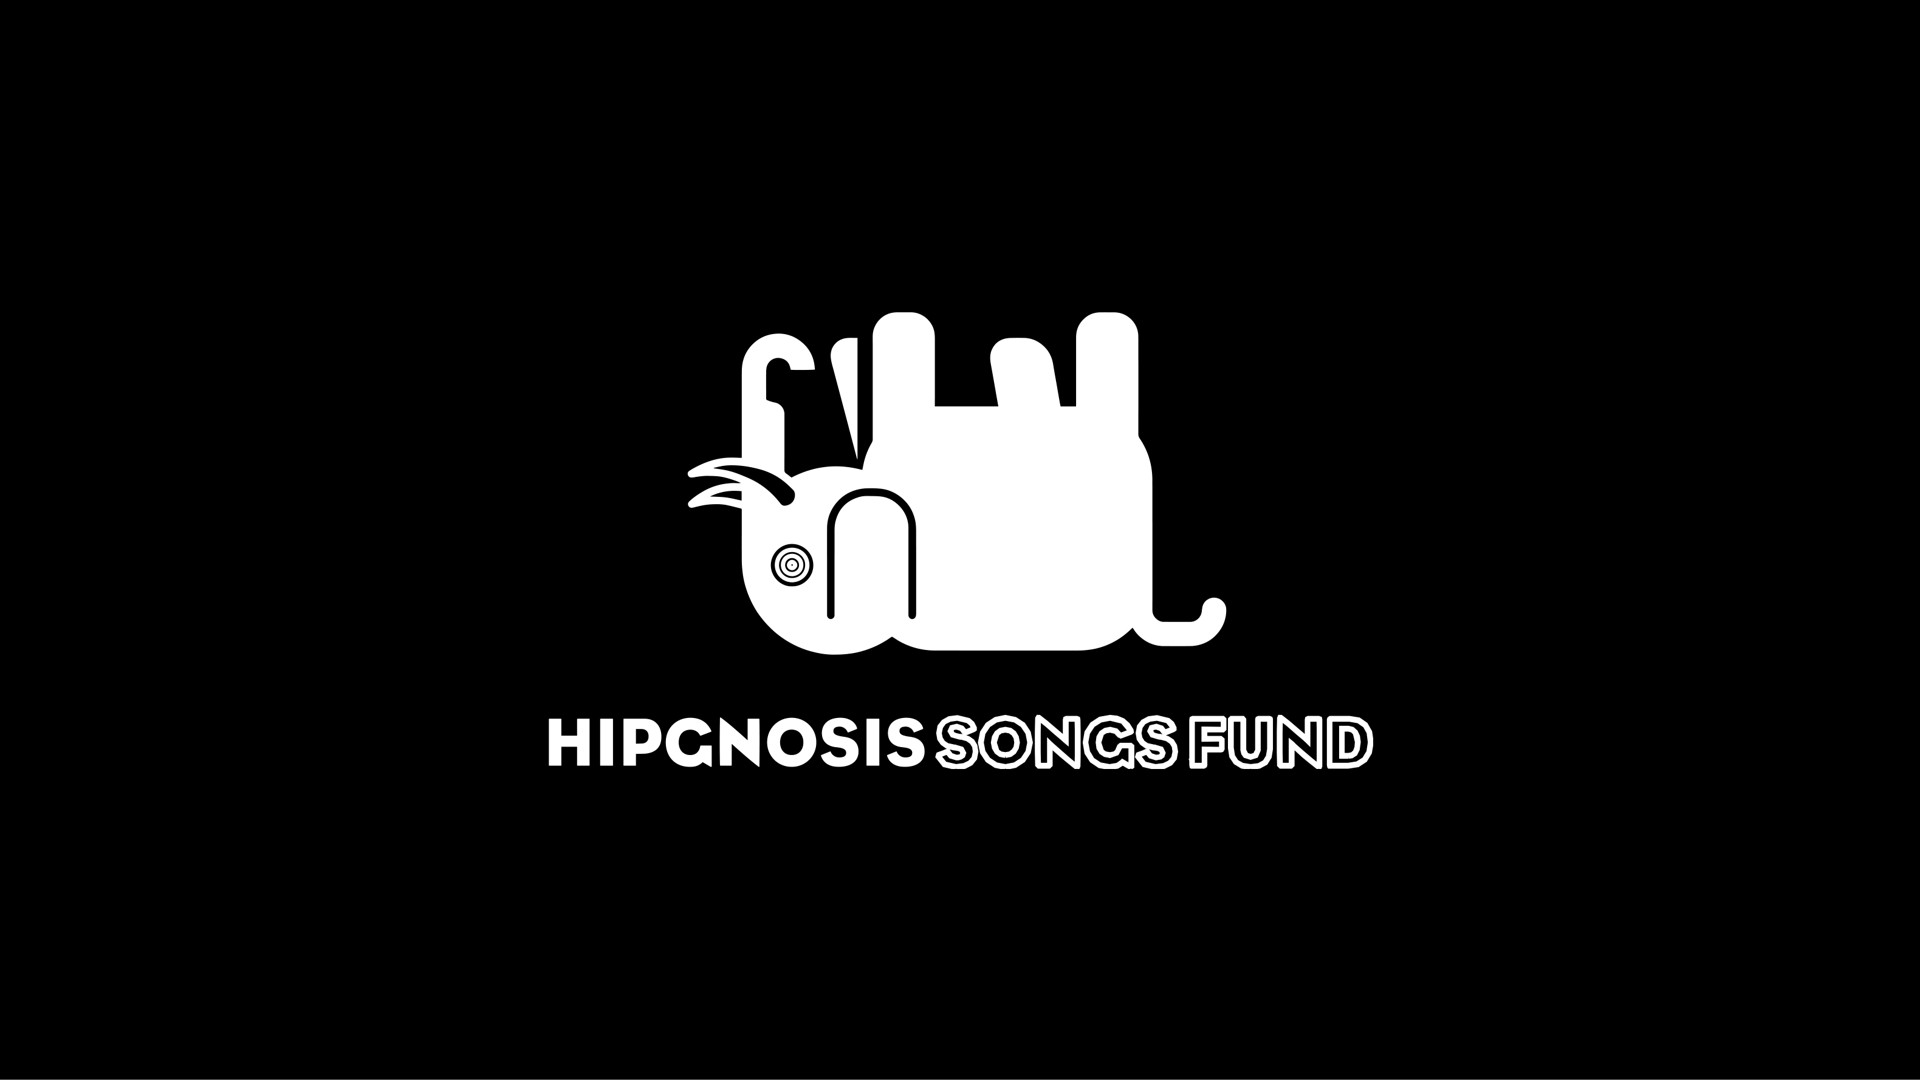 songs fund | Hipgnosis Songs Fund